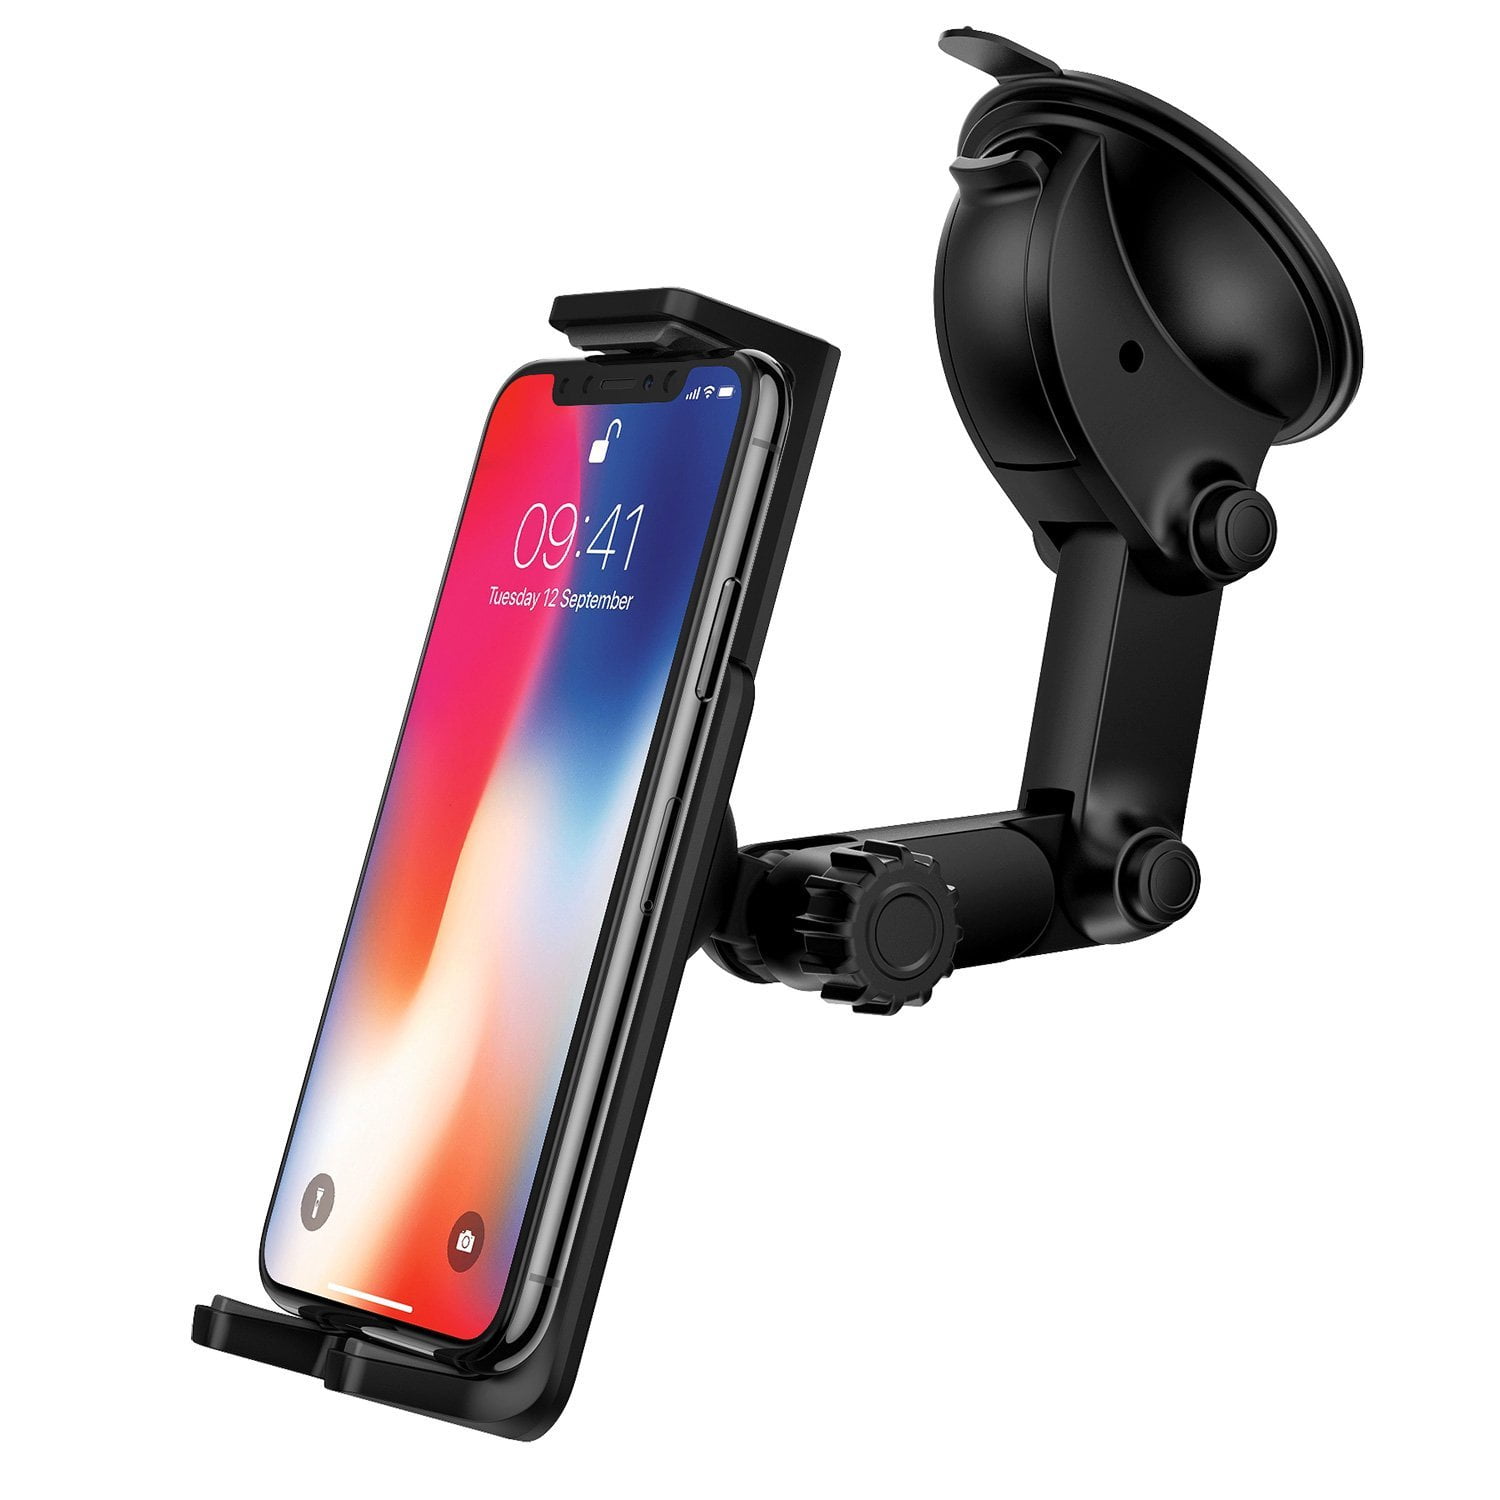 Phone Car Holder Mount RAXFLY Dashboard Cell Phone Holder for Car Universal Anti-Slip Silicone Suction Pad Dashboard Mount Stand Compatible with iPhone 11 Samsung S20 S10 Plus All Smartphones